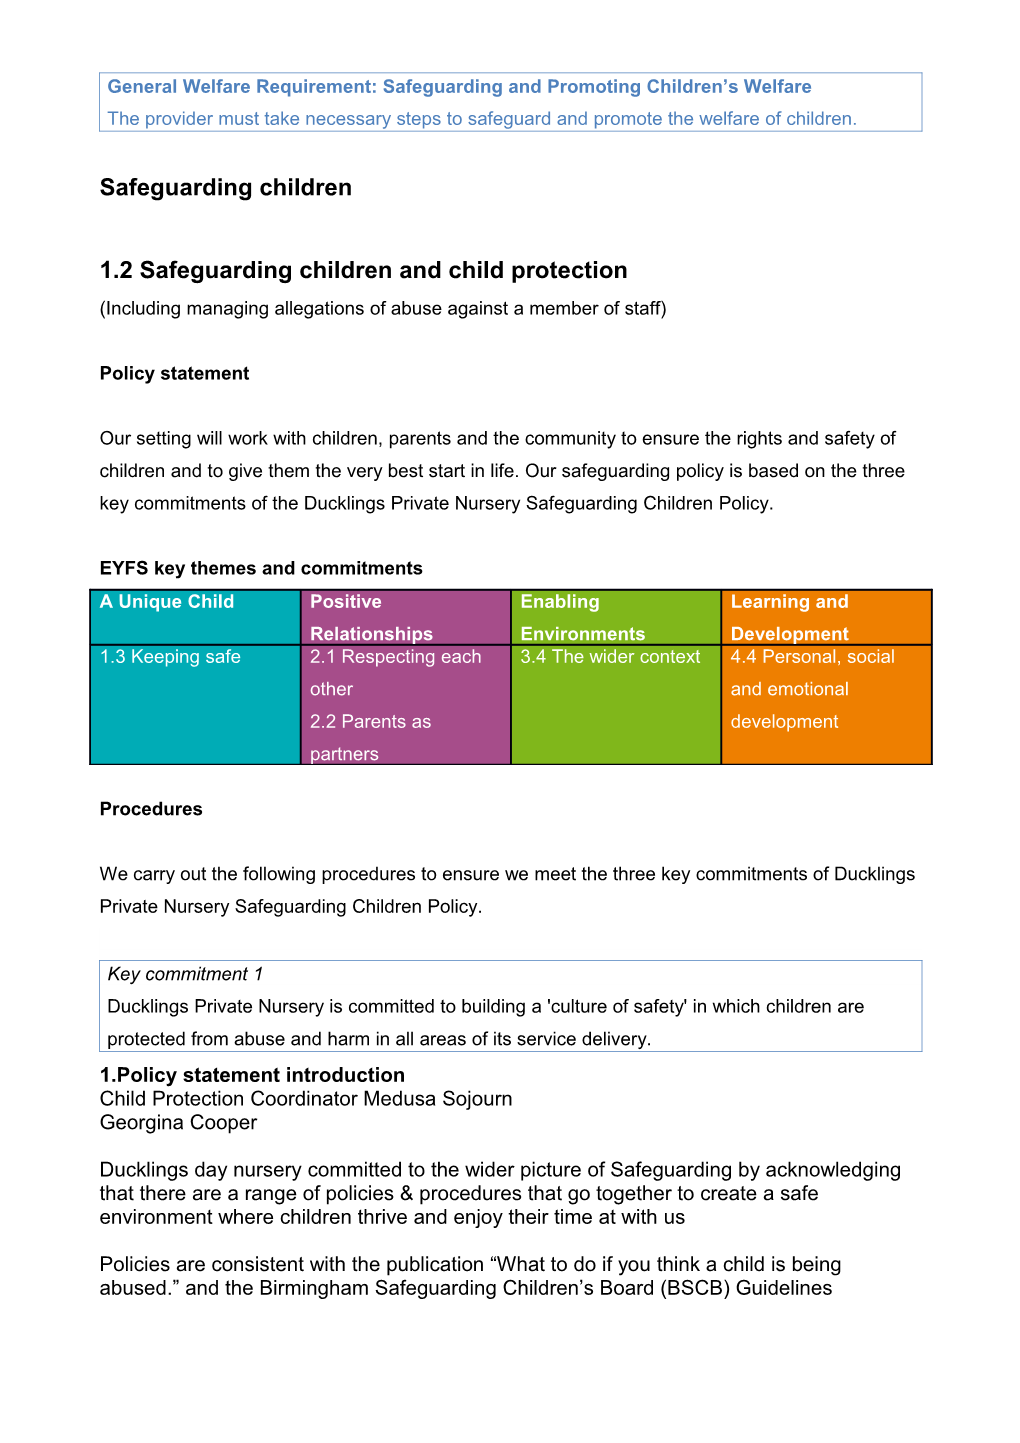 1.2 Safeguarding Children and Child Protection